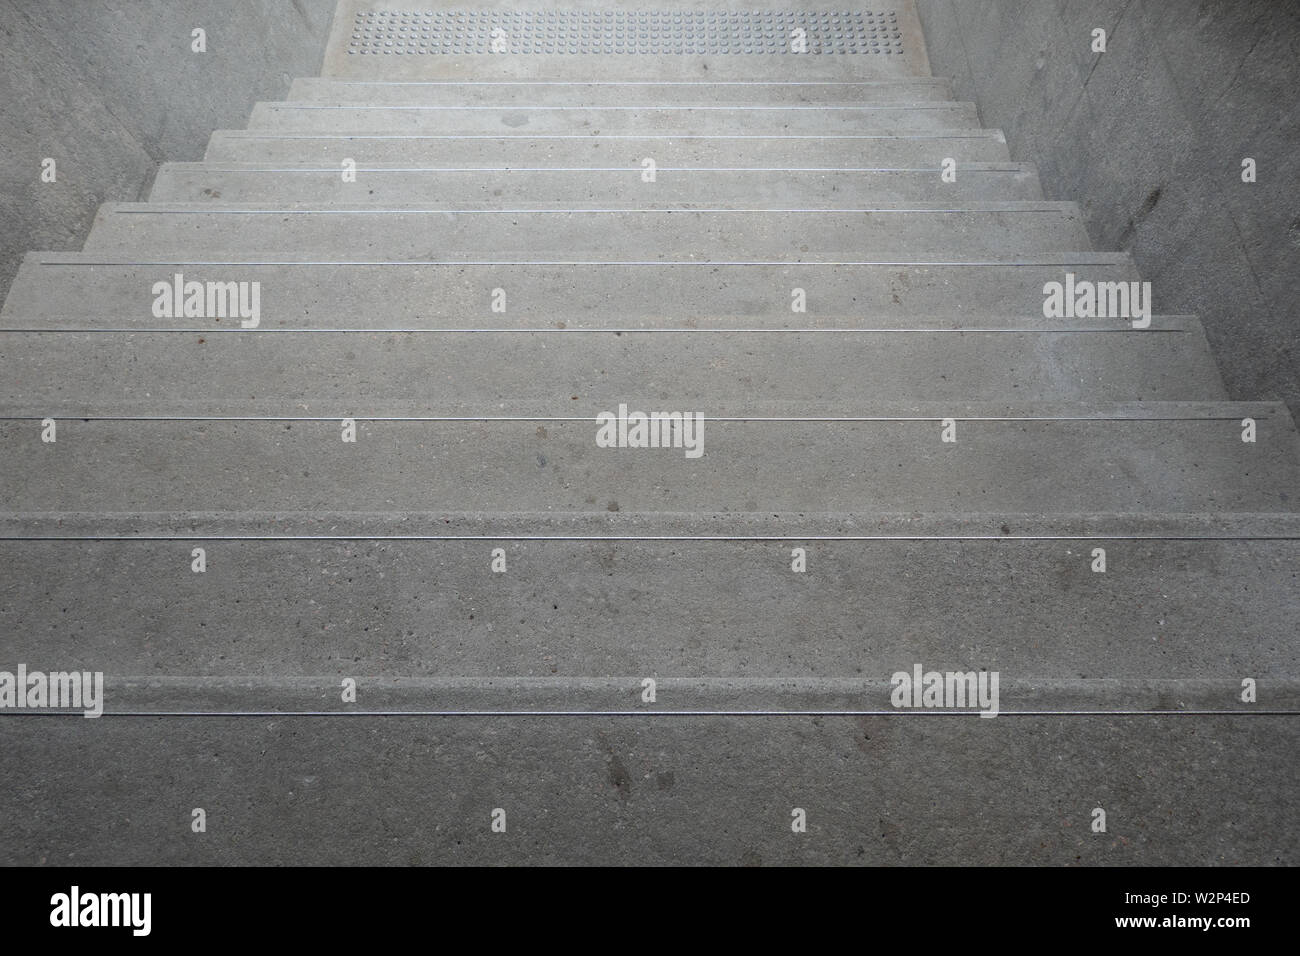 Up and down stairs with handrails for balancing while climbing the stairs Safety building design concept Stock Photo